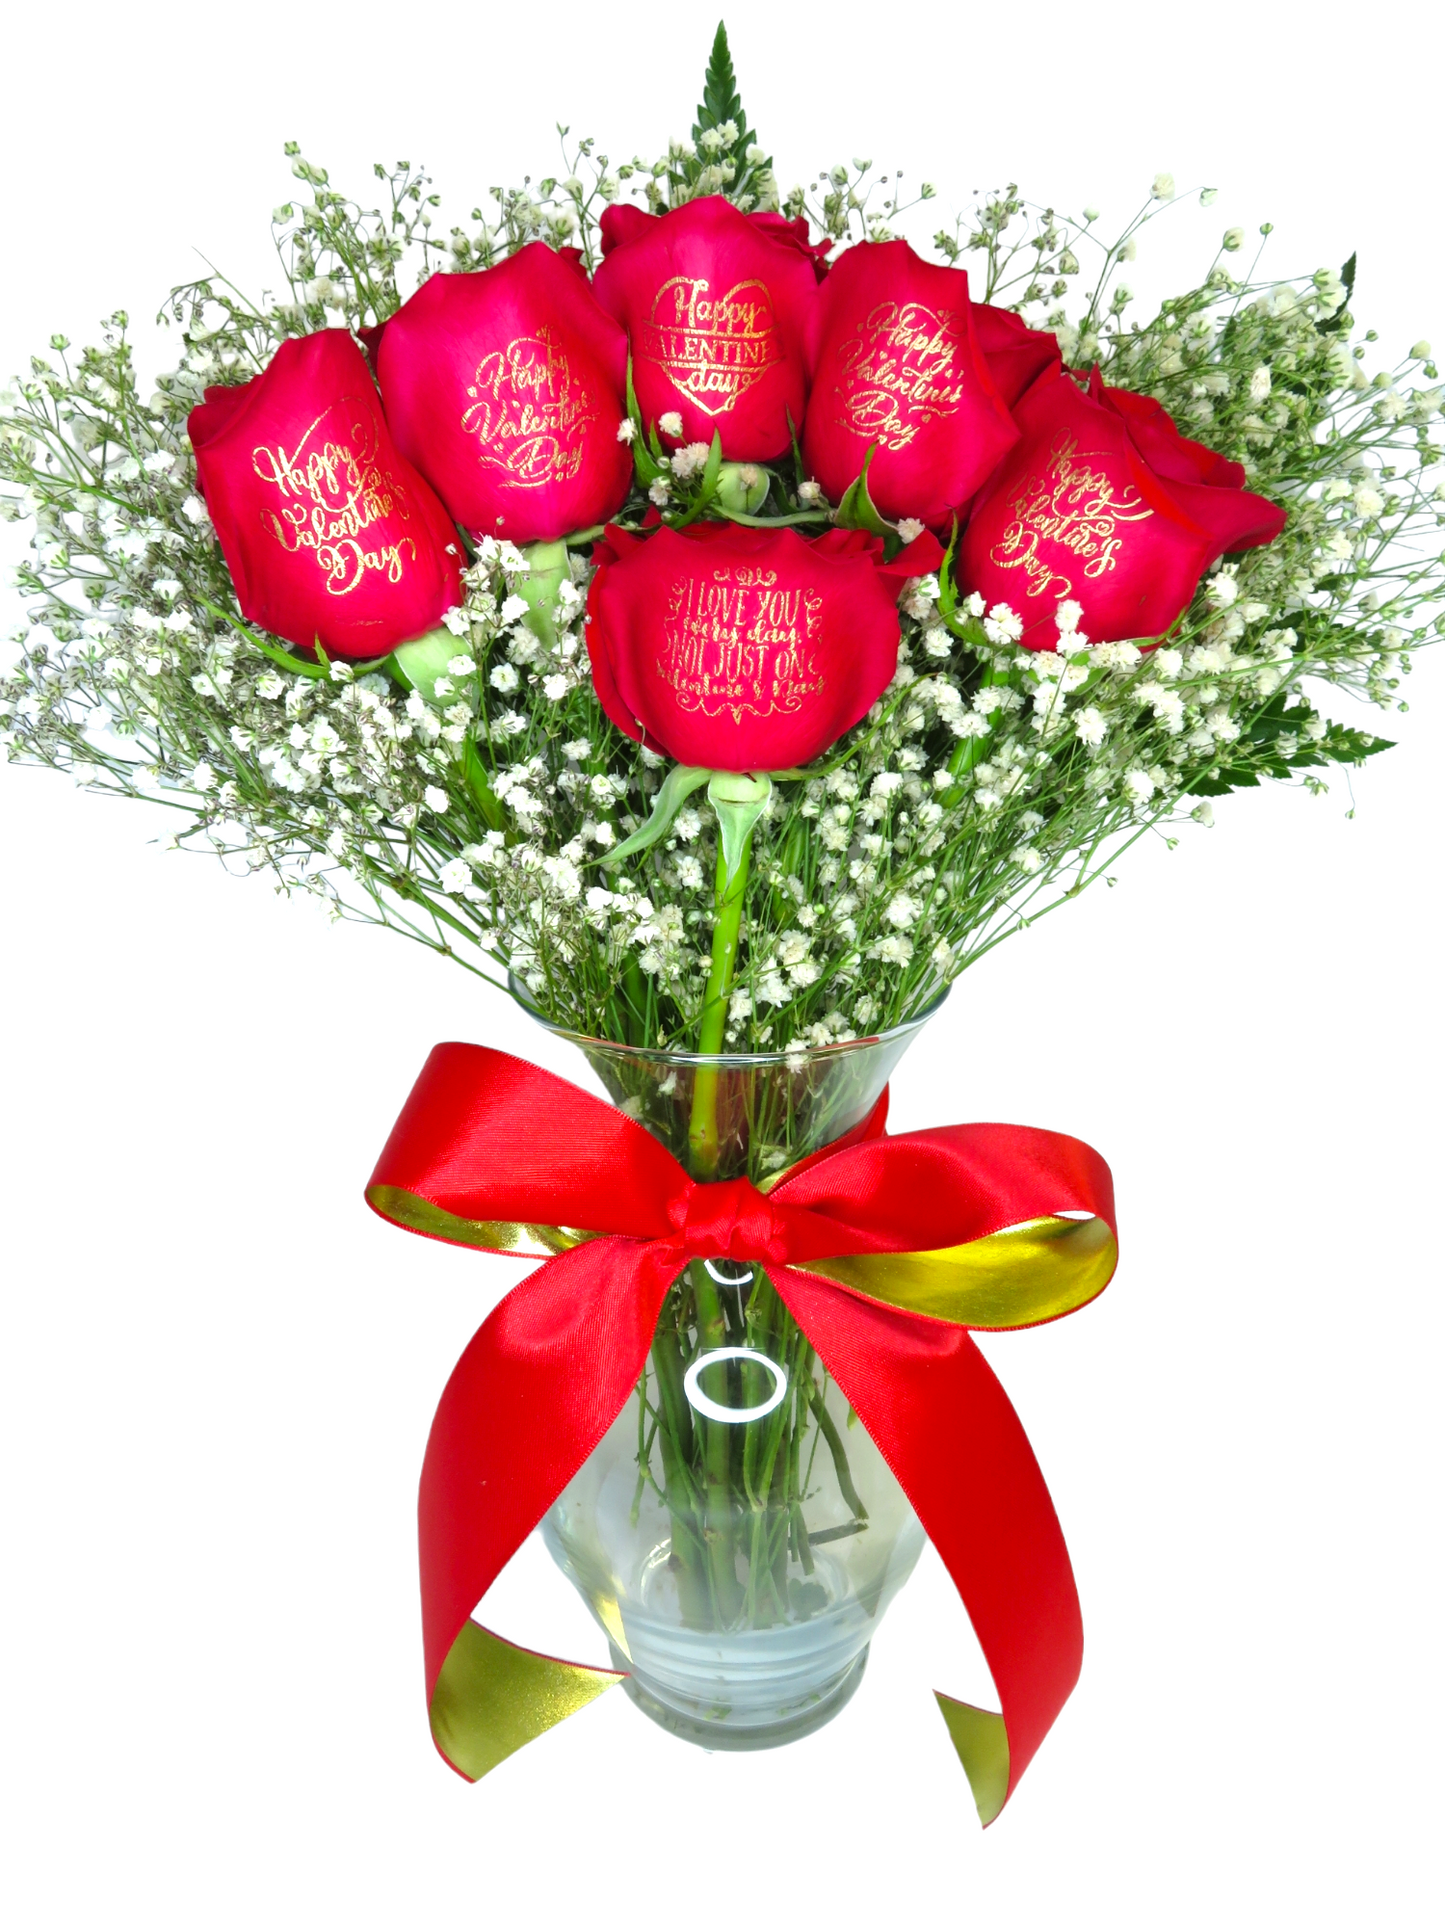 6 Red Roses - "Happy Valentine's Day - I Love You Every Day, Not Just On Valentine's Day